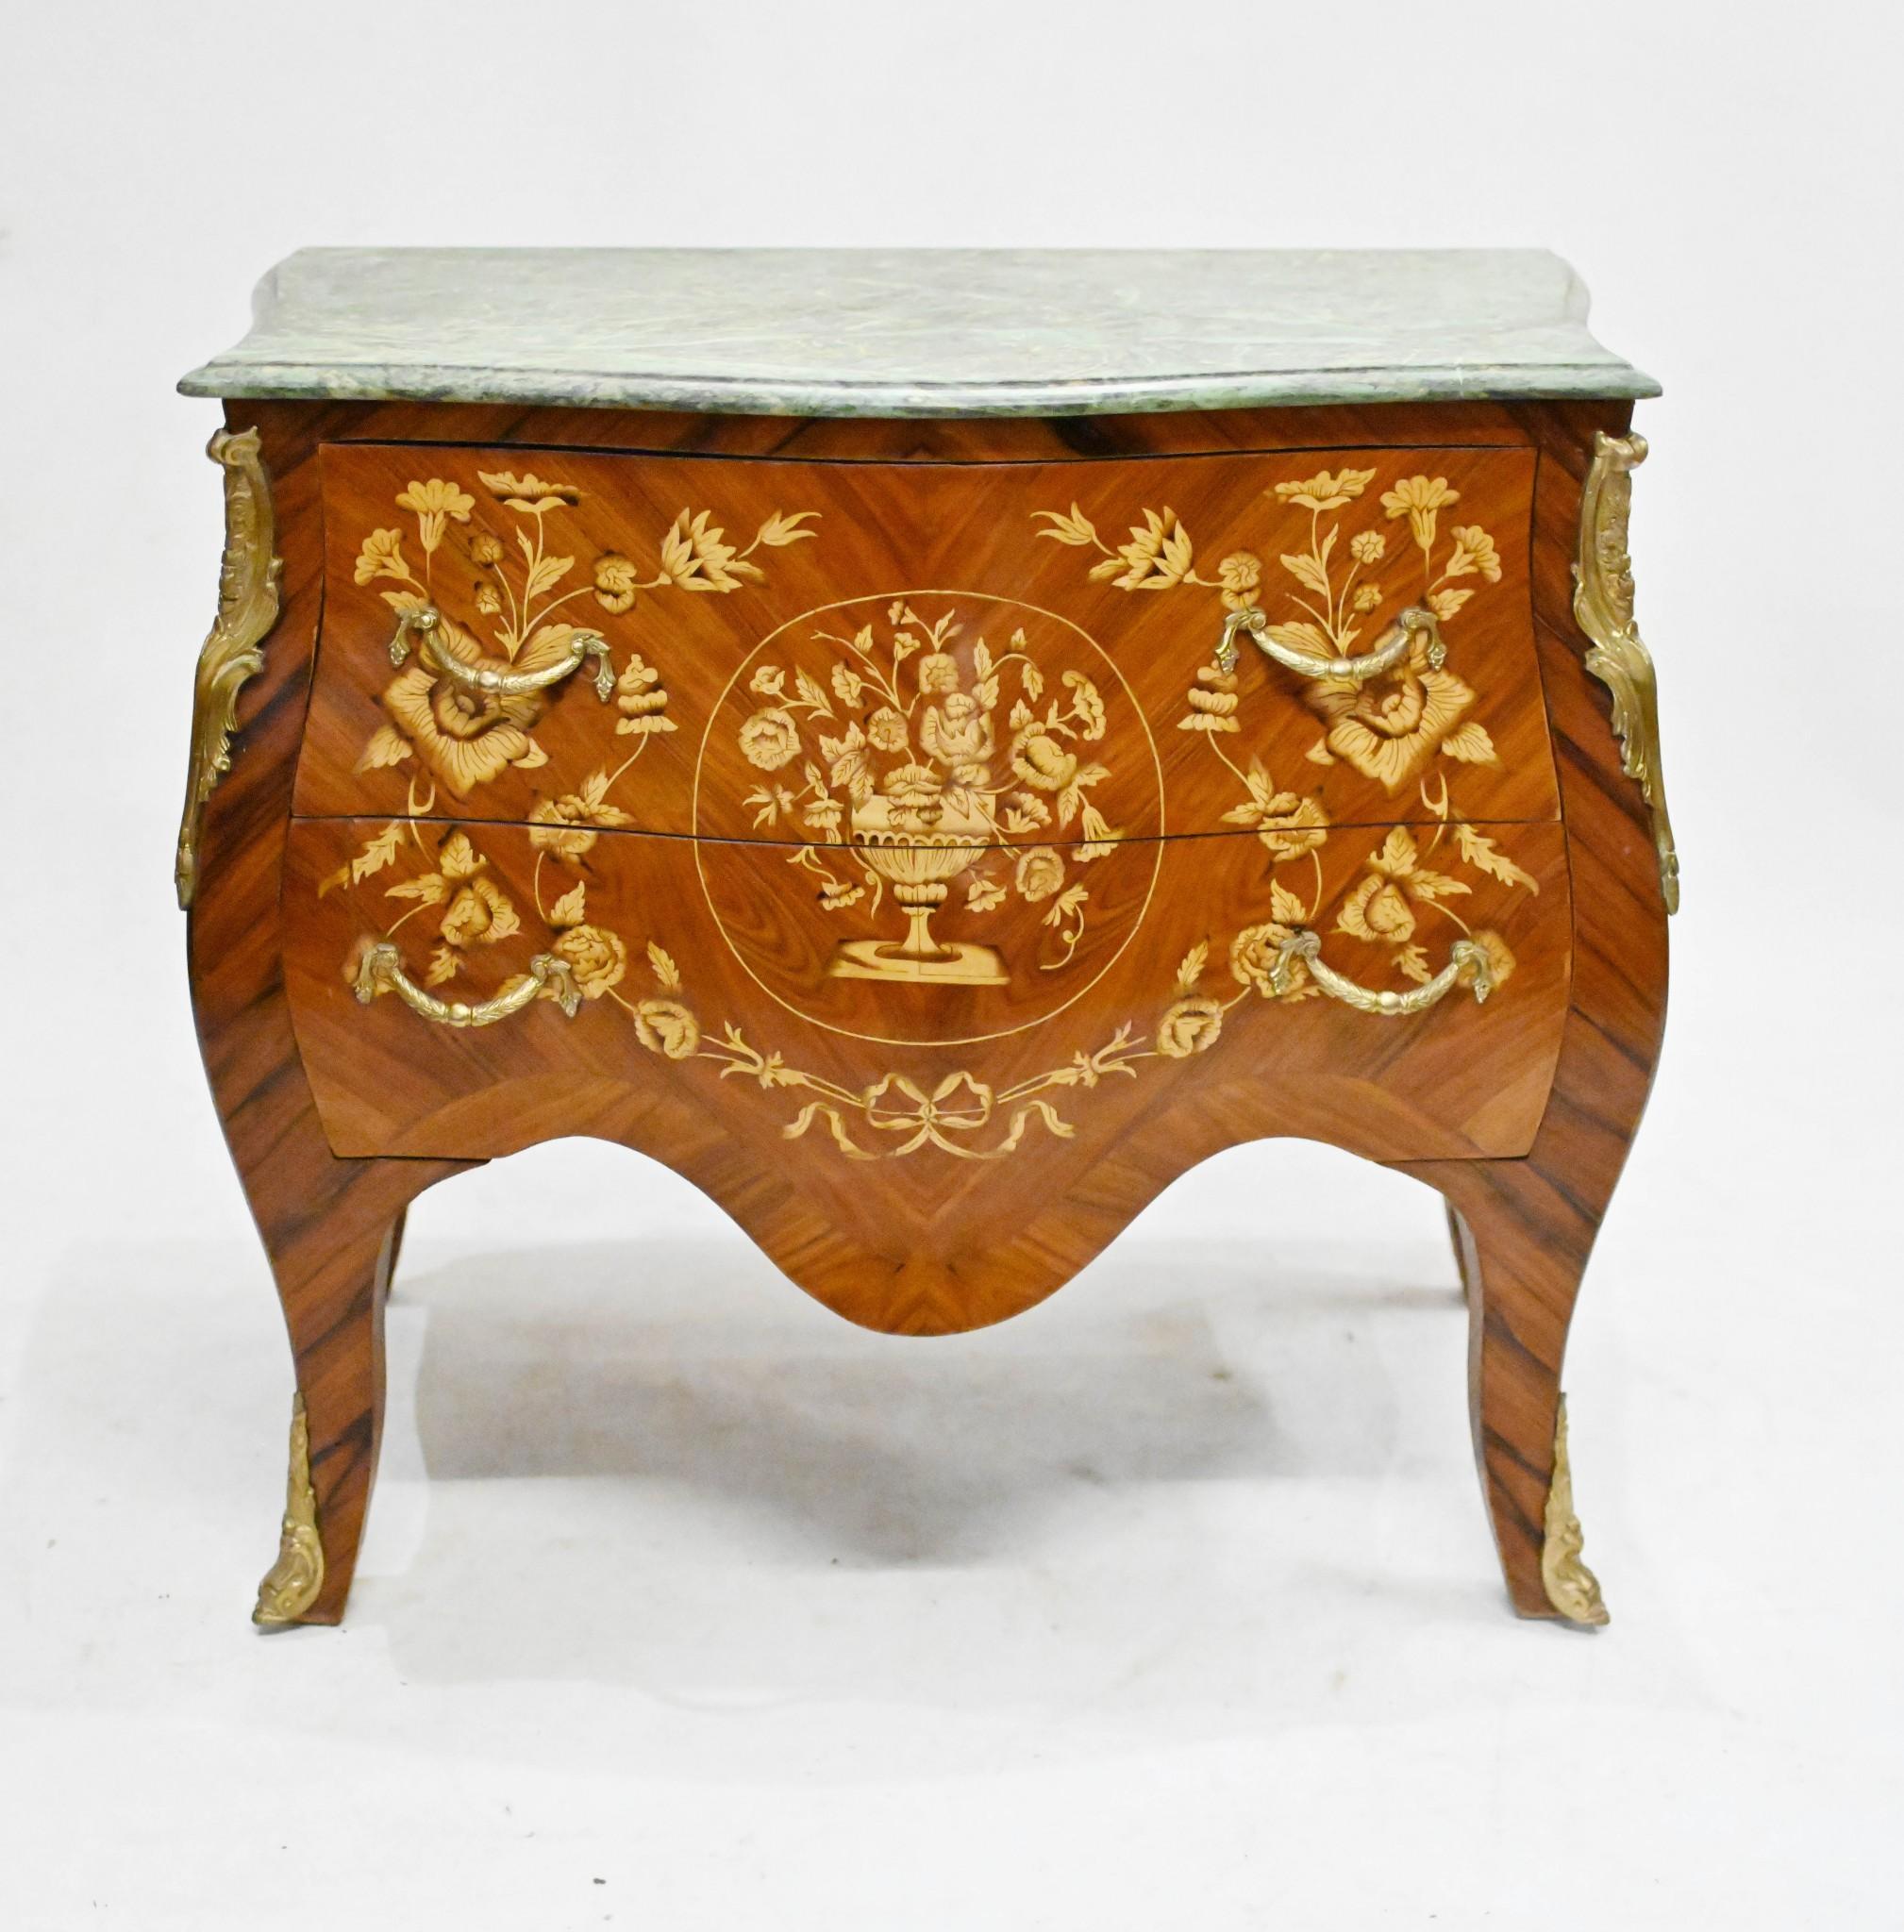 Gorgeous French bombe commode in the Empire manner
Bombe refers to the exaggerated shape of the chest
Intricate marquetry inlay work is proffuse and very technical A marquetry french commode with a marble top
Bought from a dealer on Marche Biron at